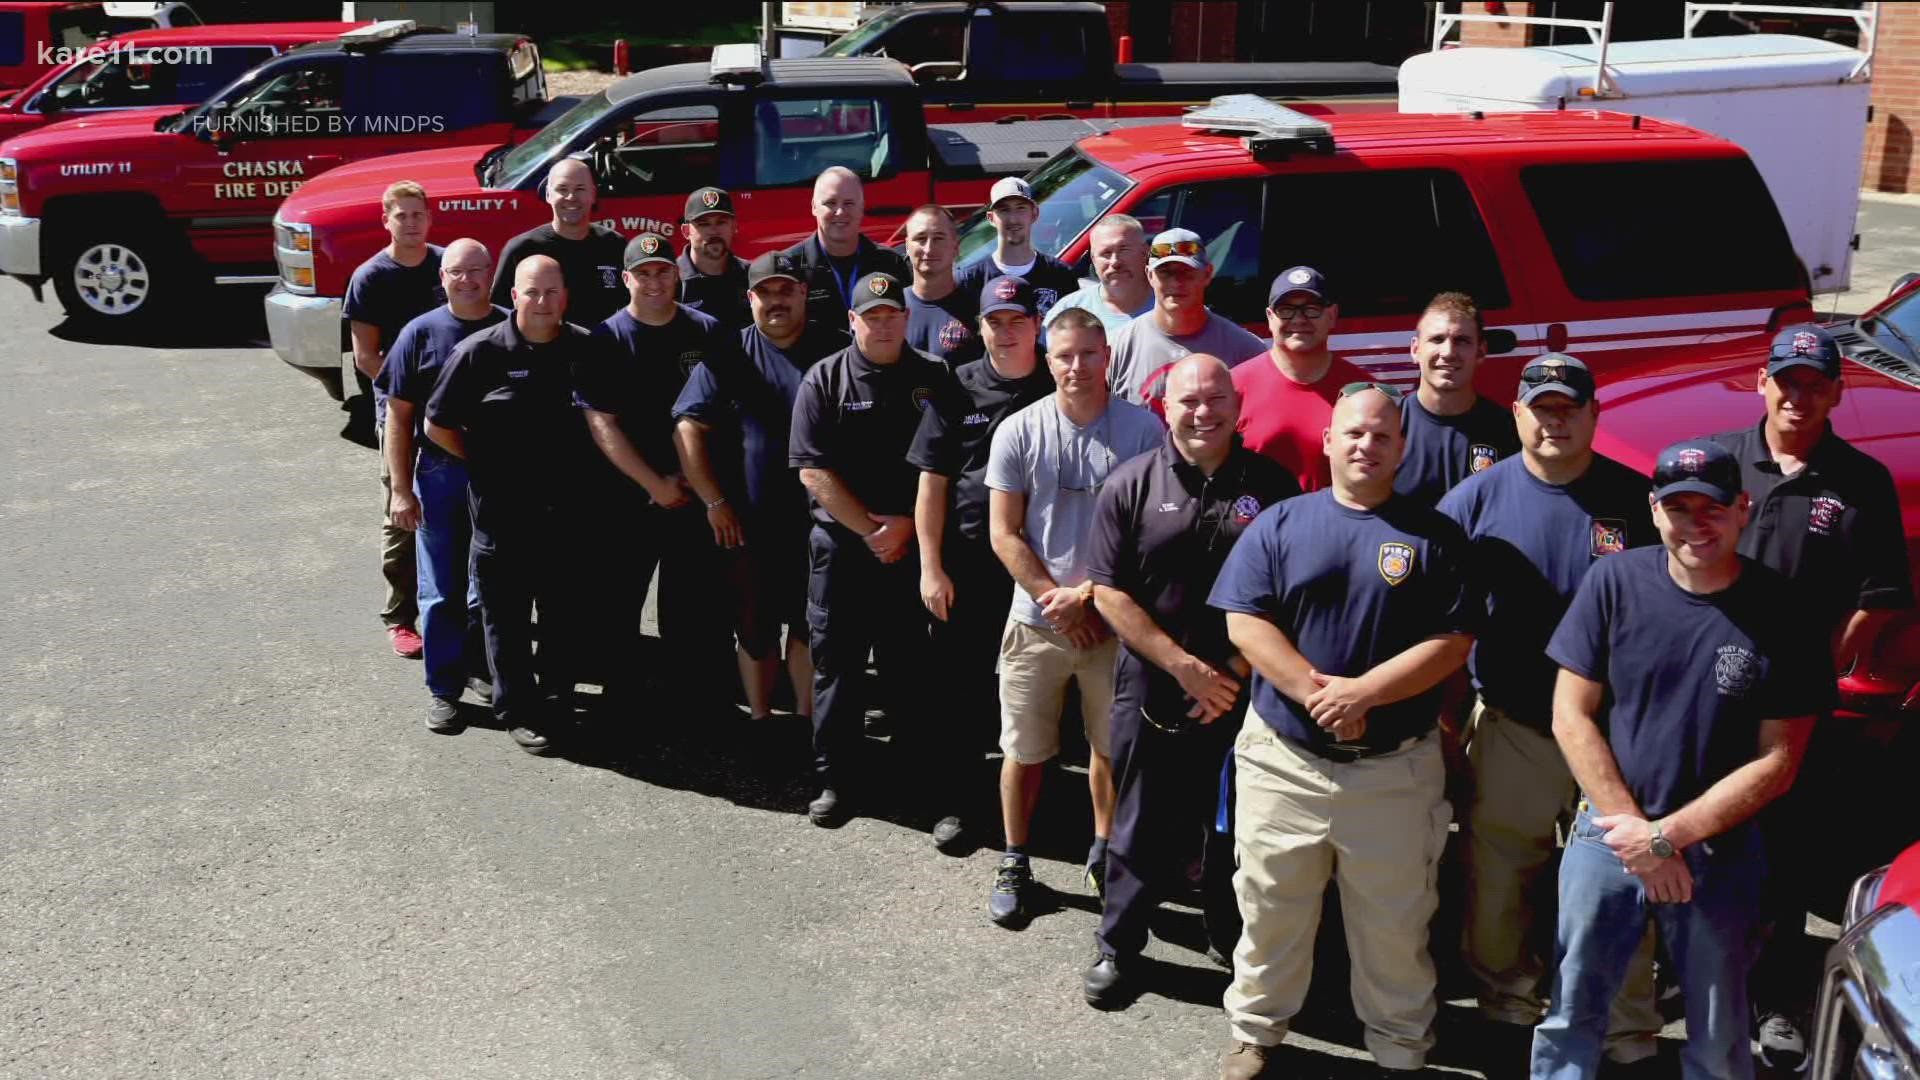 Local firefighters returned Wednesday from helping relief efforts in Louisiana in the aftermath of Hurricane Ida.